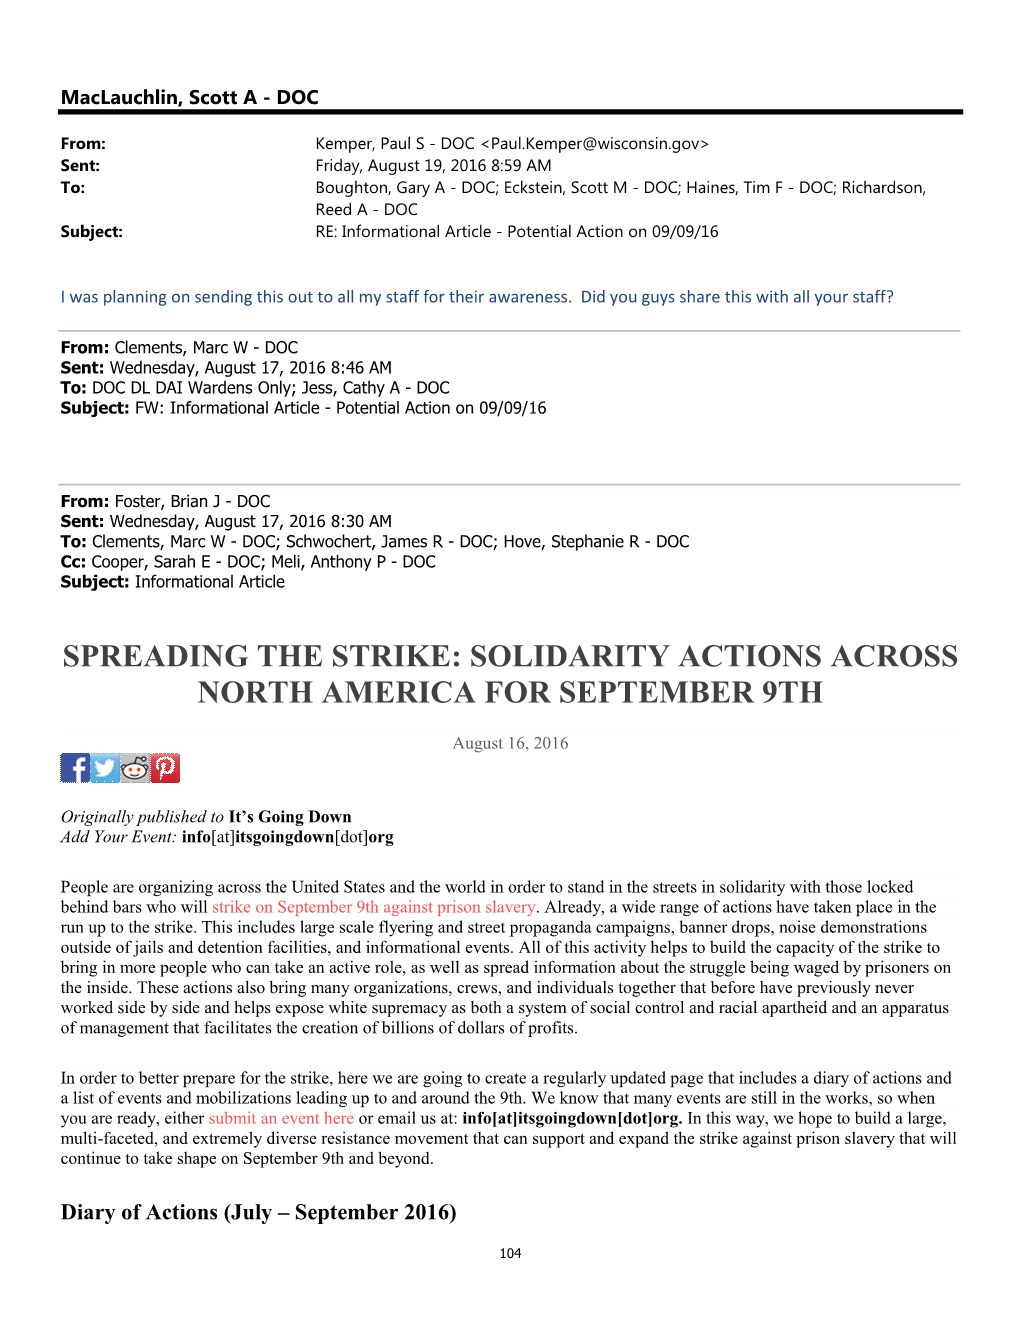 Spreading the Strike: Solidarity Actions Across North America for September 9Th